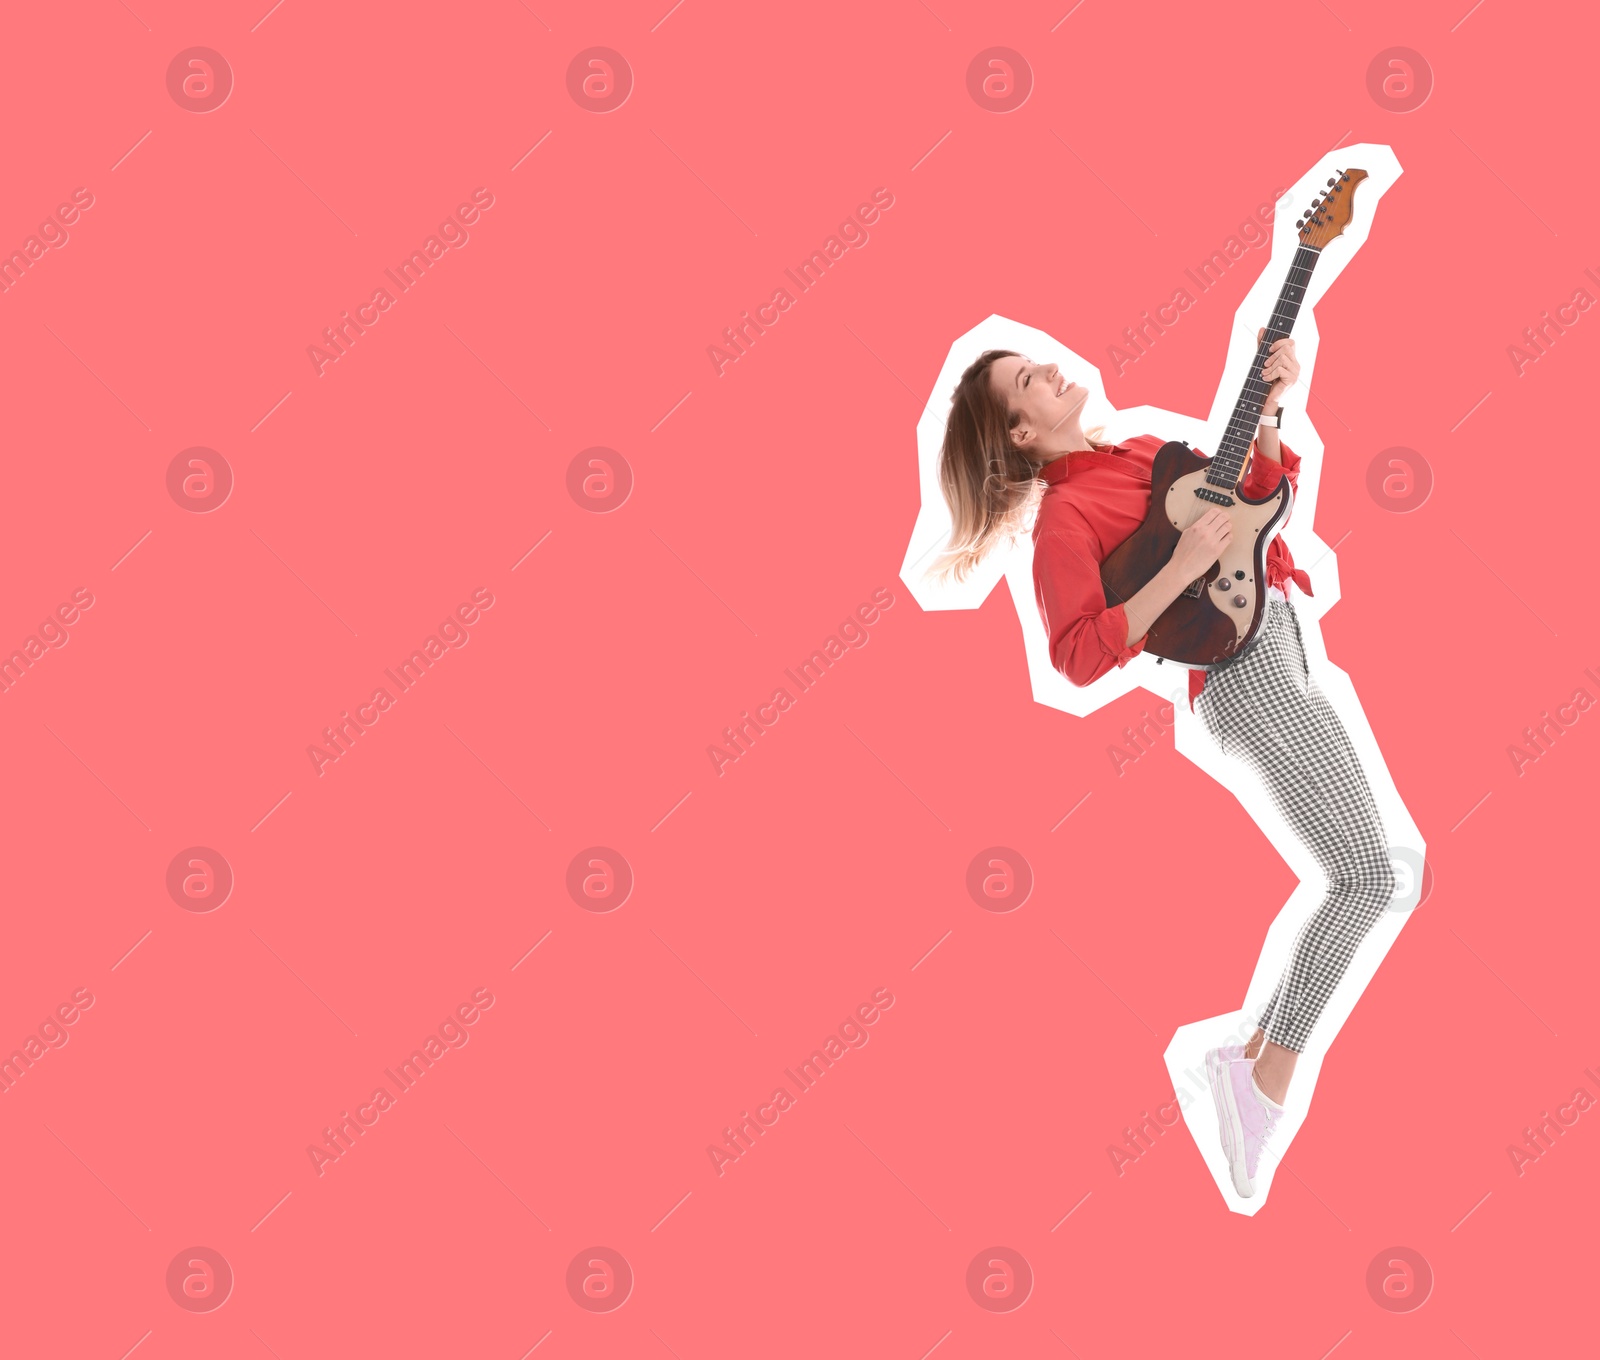 Image of Pop art poster. Woman playing guitar on coral background. Space for text